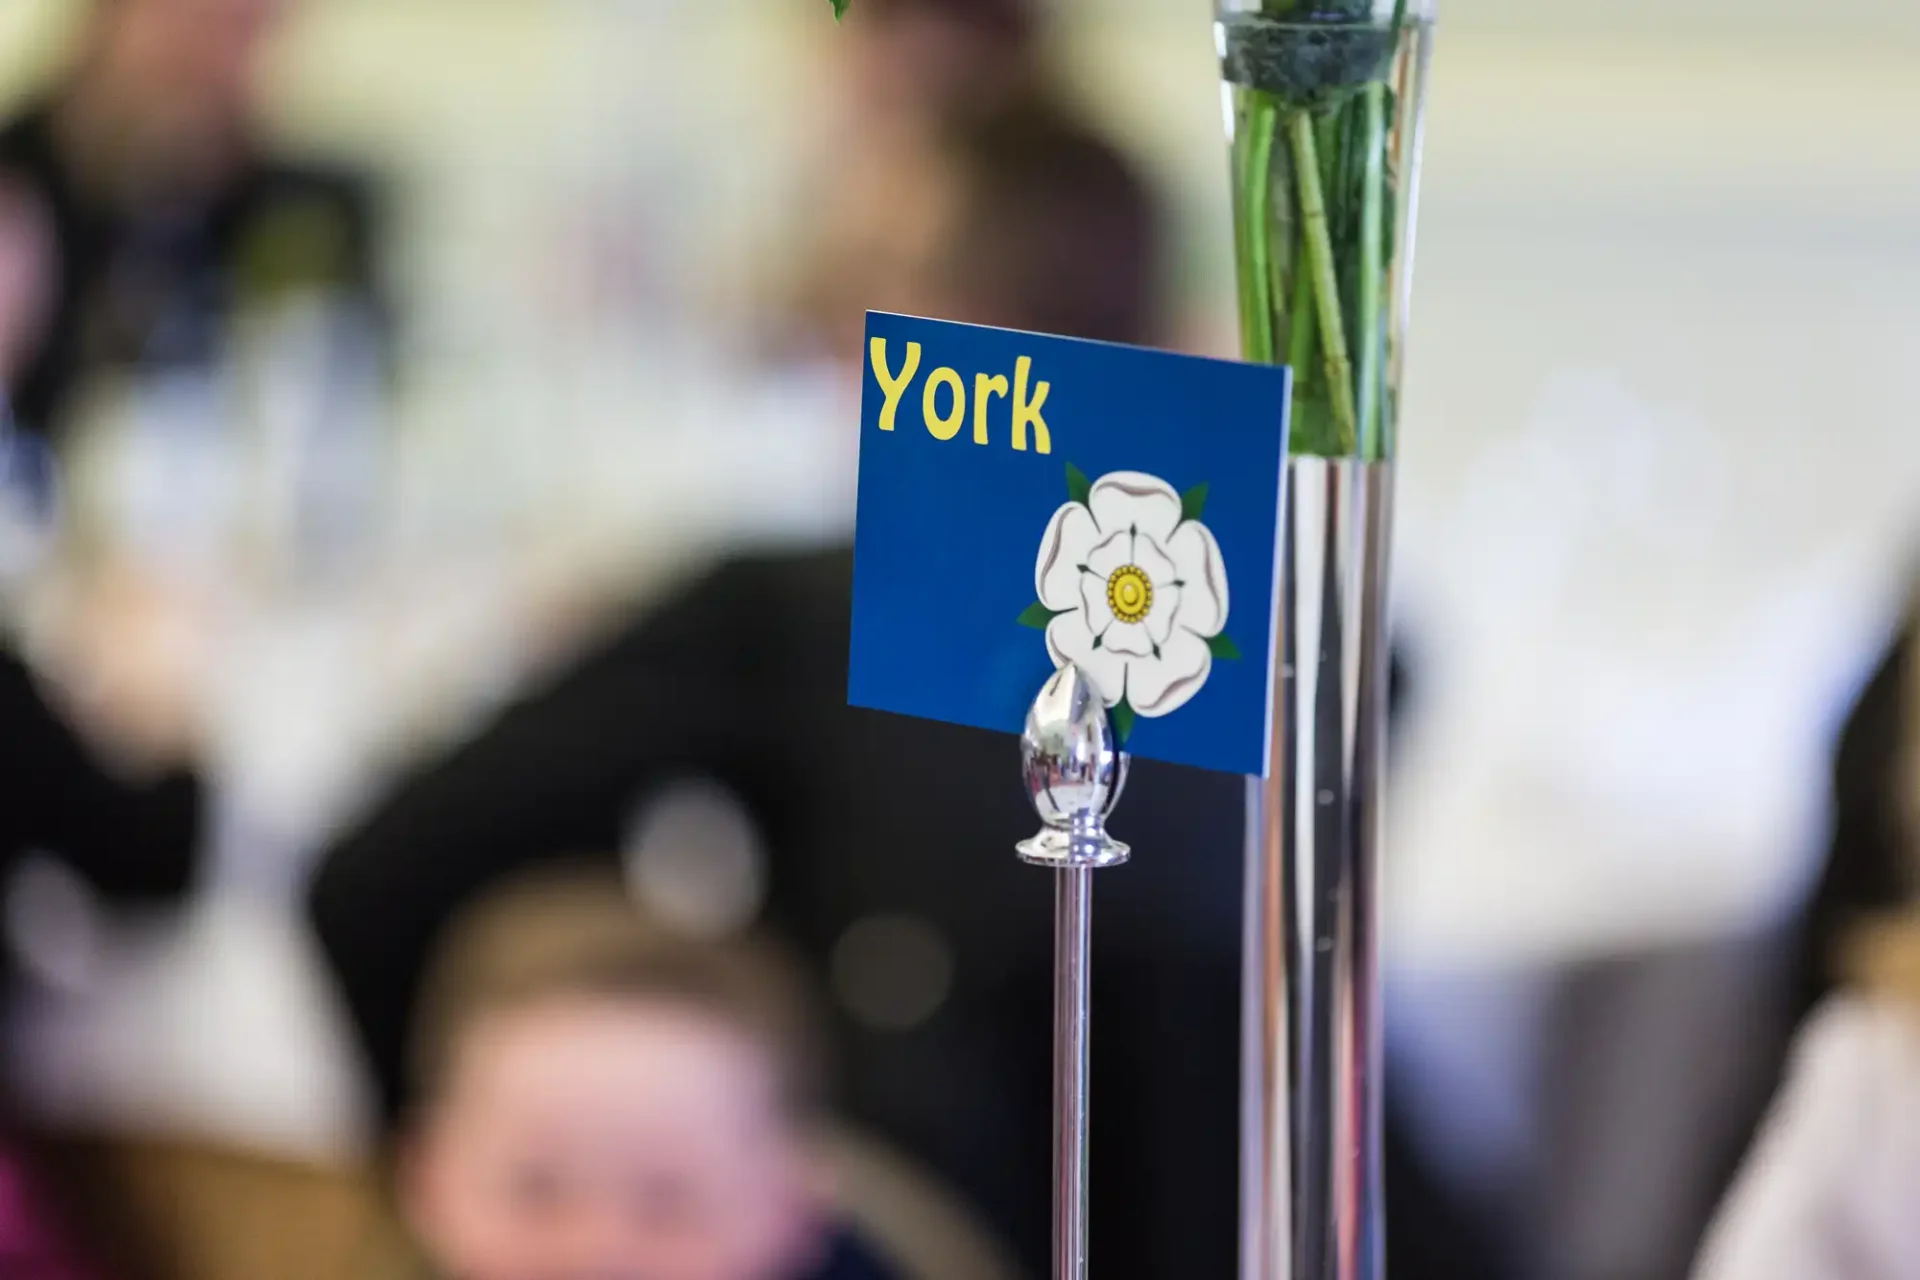 Table marker with "york" and a white flower emblem in a glass stand, with out-of-focus guests in the background.